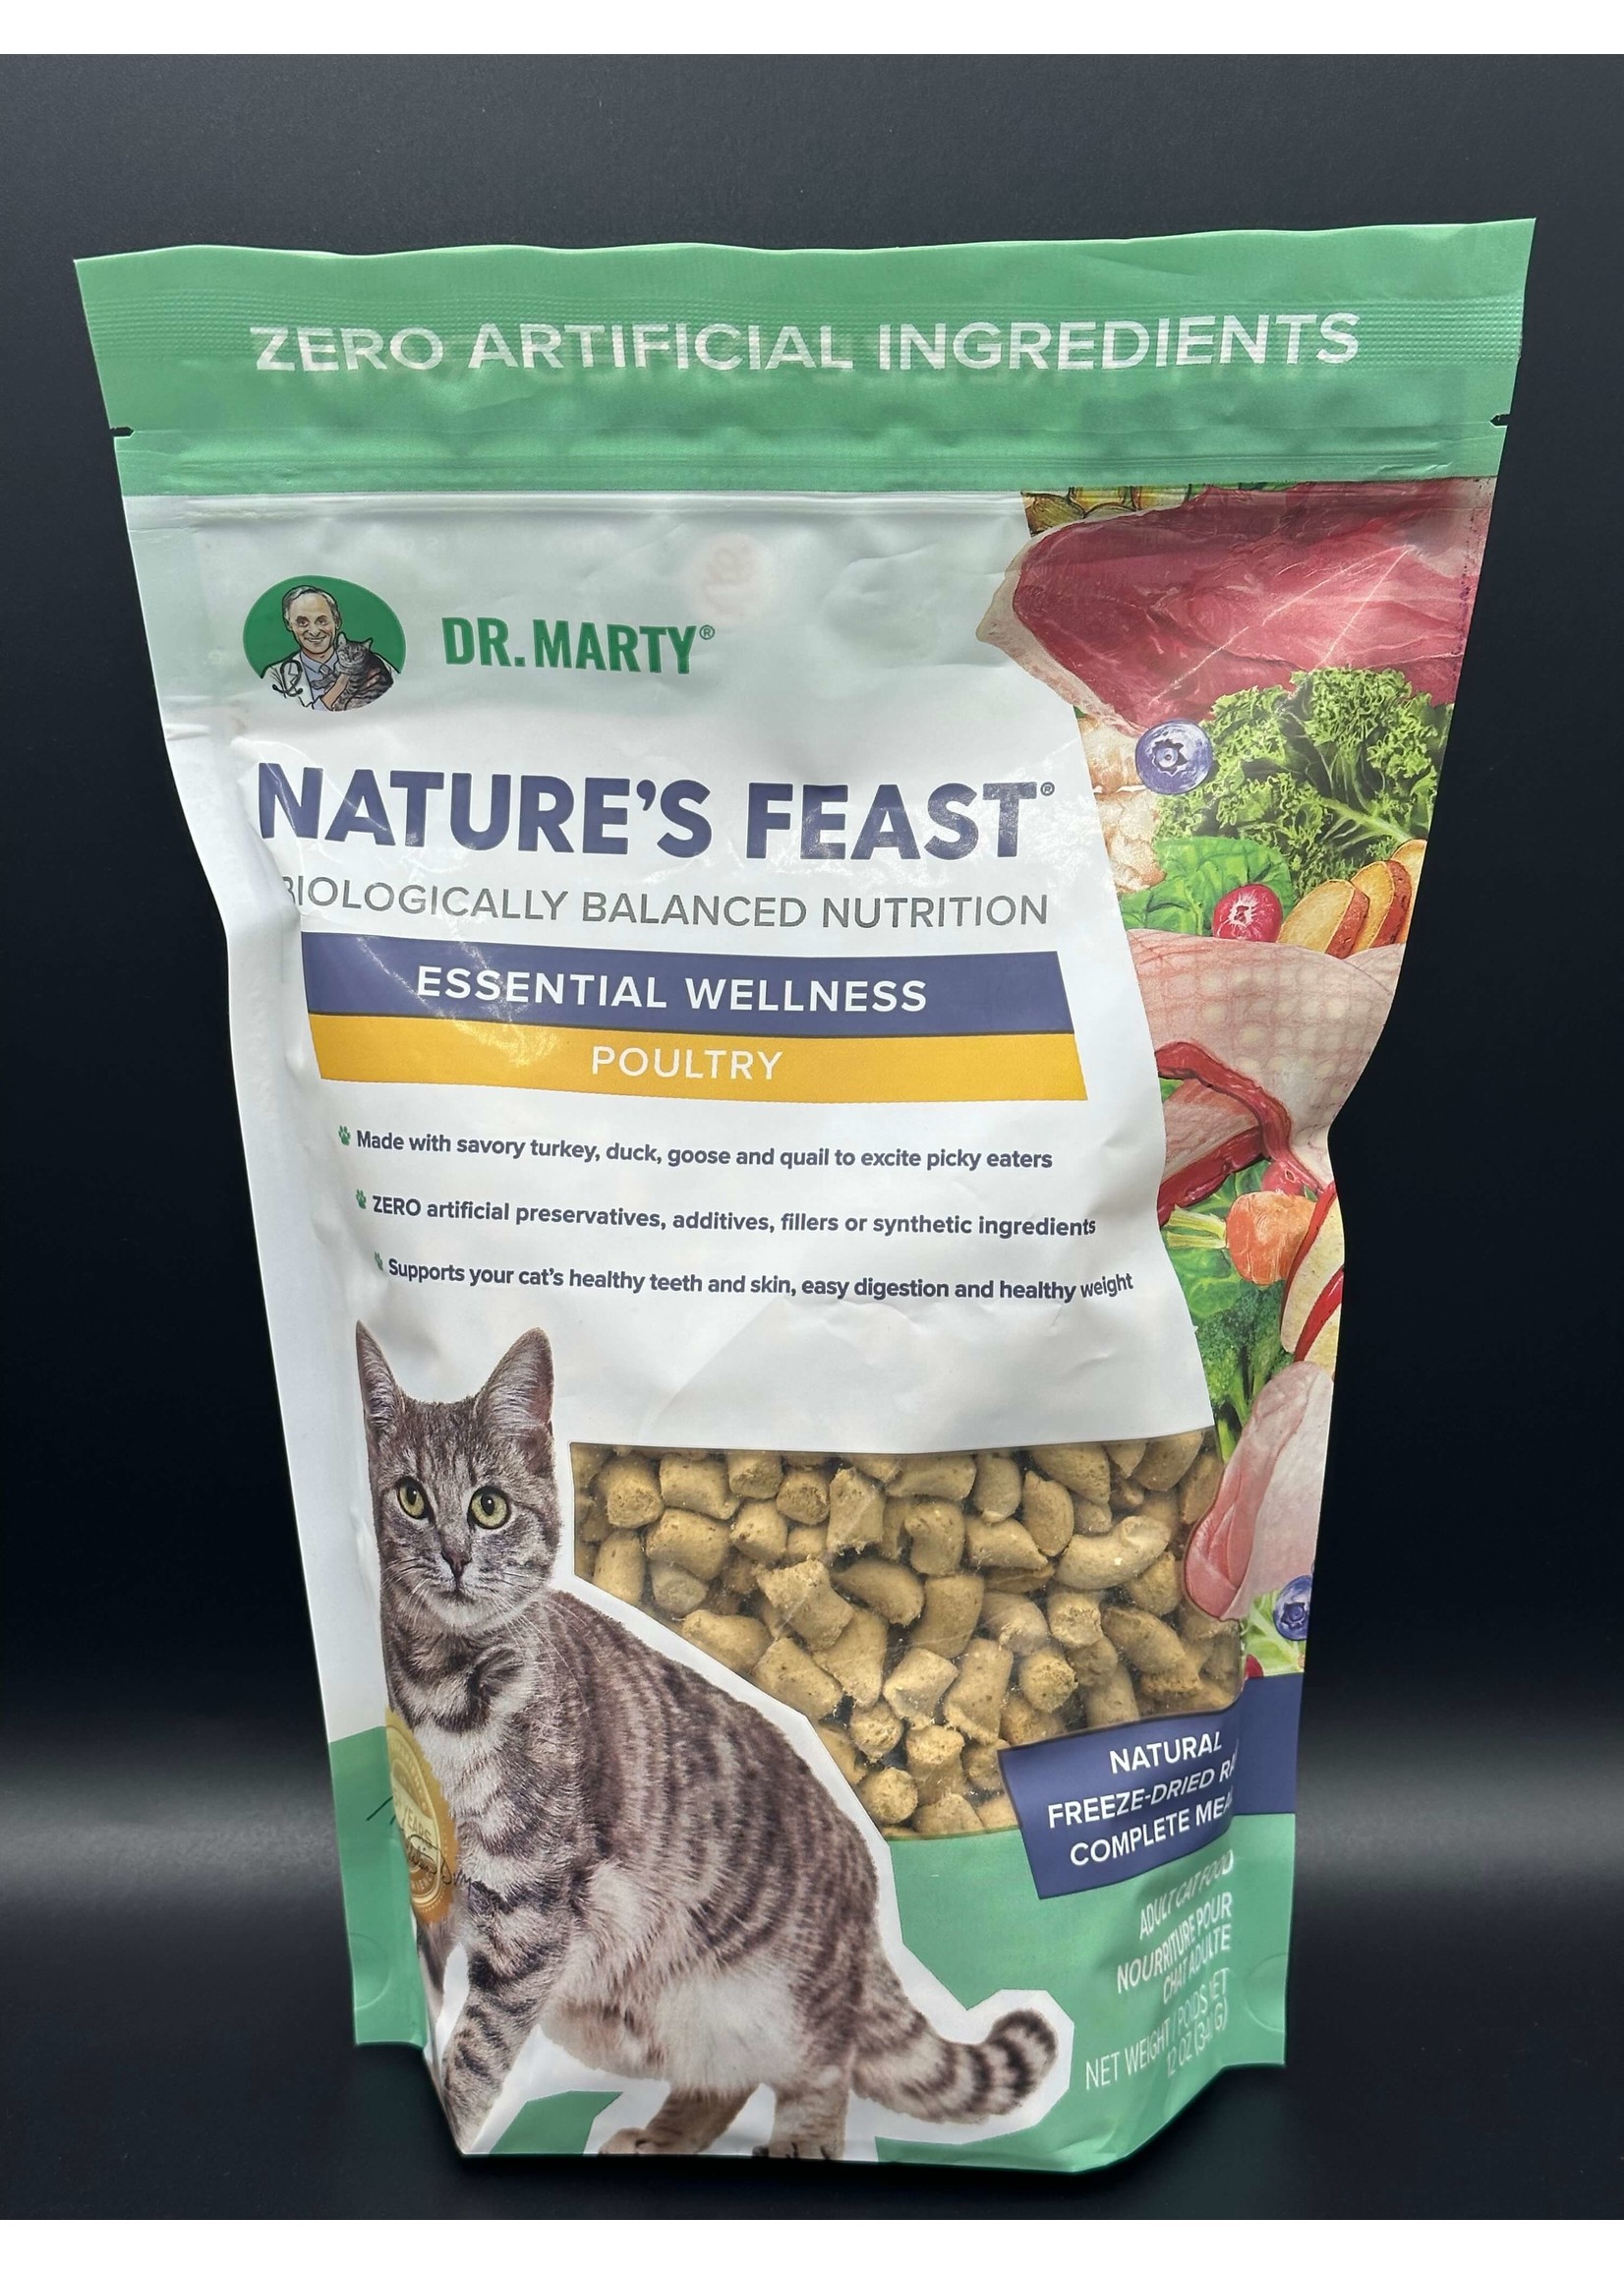 Dr. Marty Dr. Marty Nature's Feast Essential Wellness Poultry